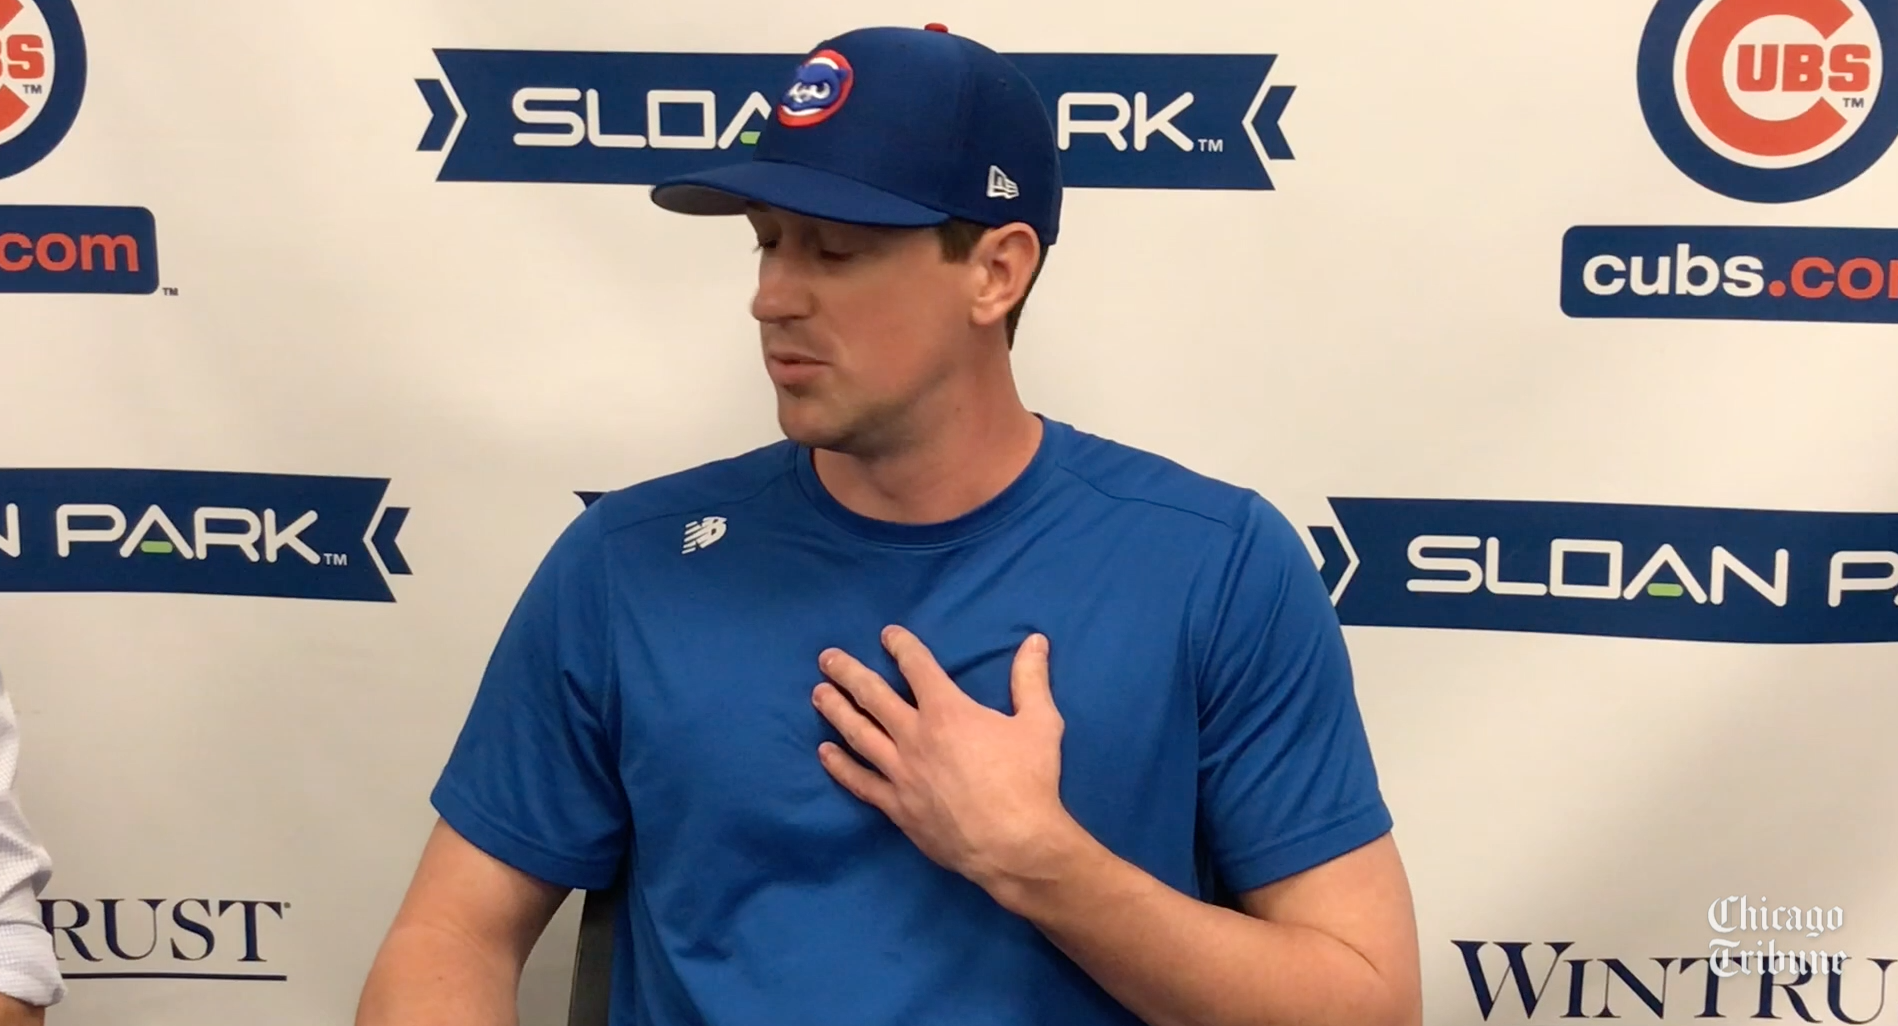 Kyle Hendricks, his velocity, and his contract extension - Bleed